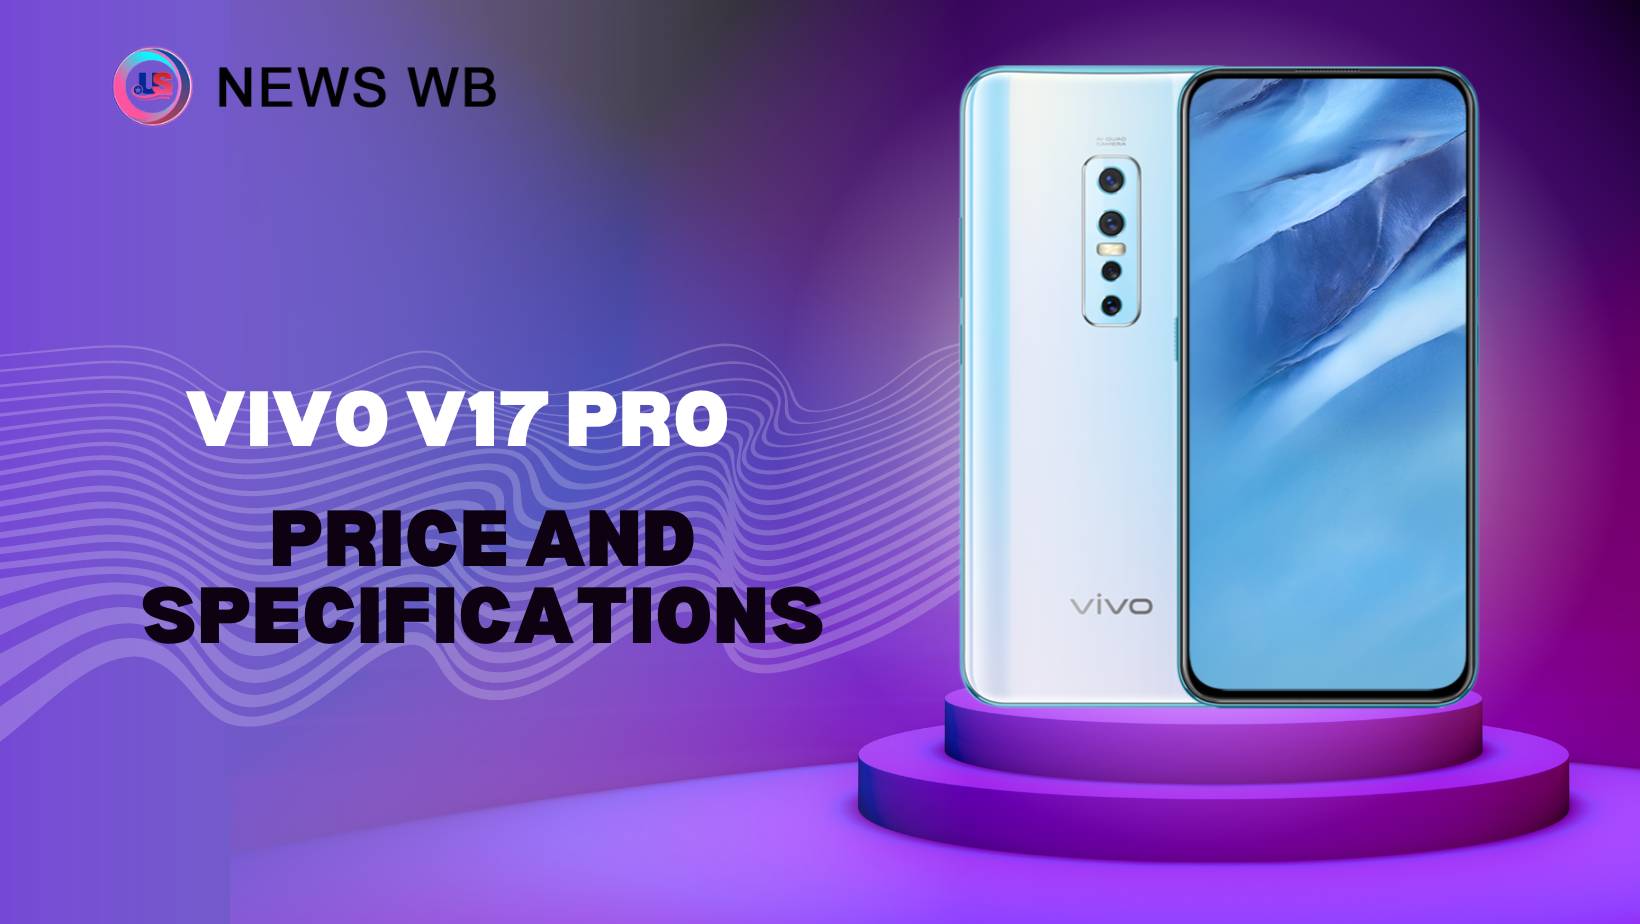 Vivo V17 Pro Price and Specifications